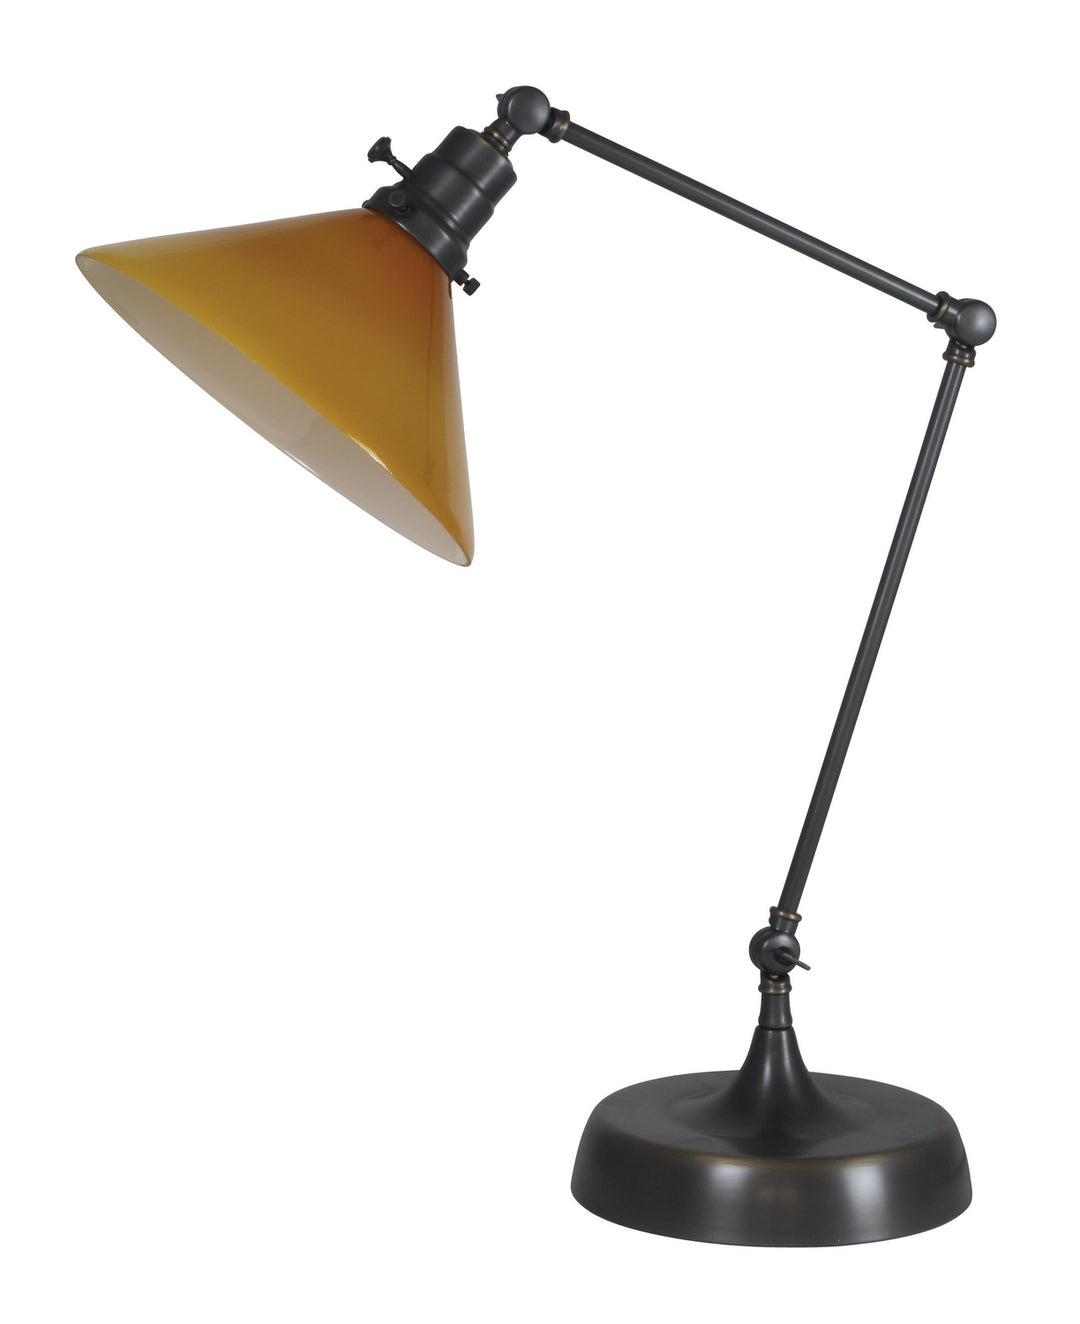 House of Troy One Light Table Lamp